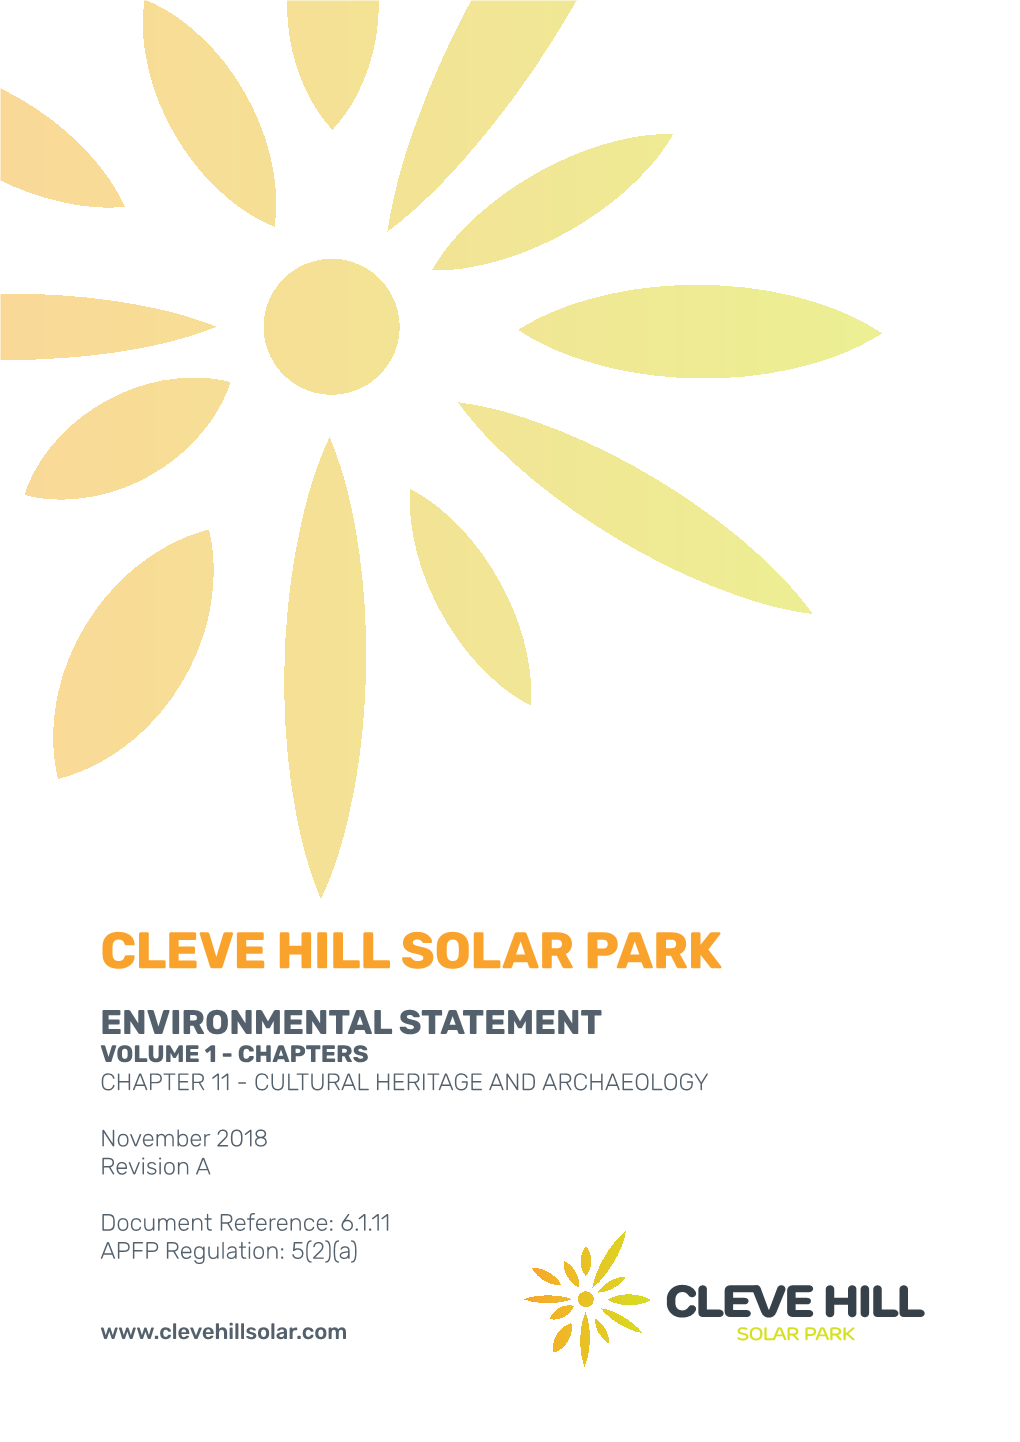 Cleve Hill Solar Park